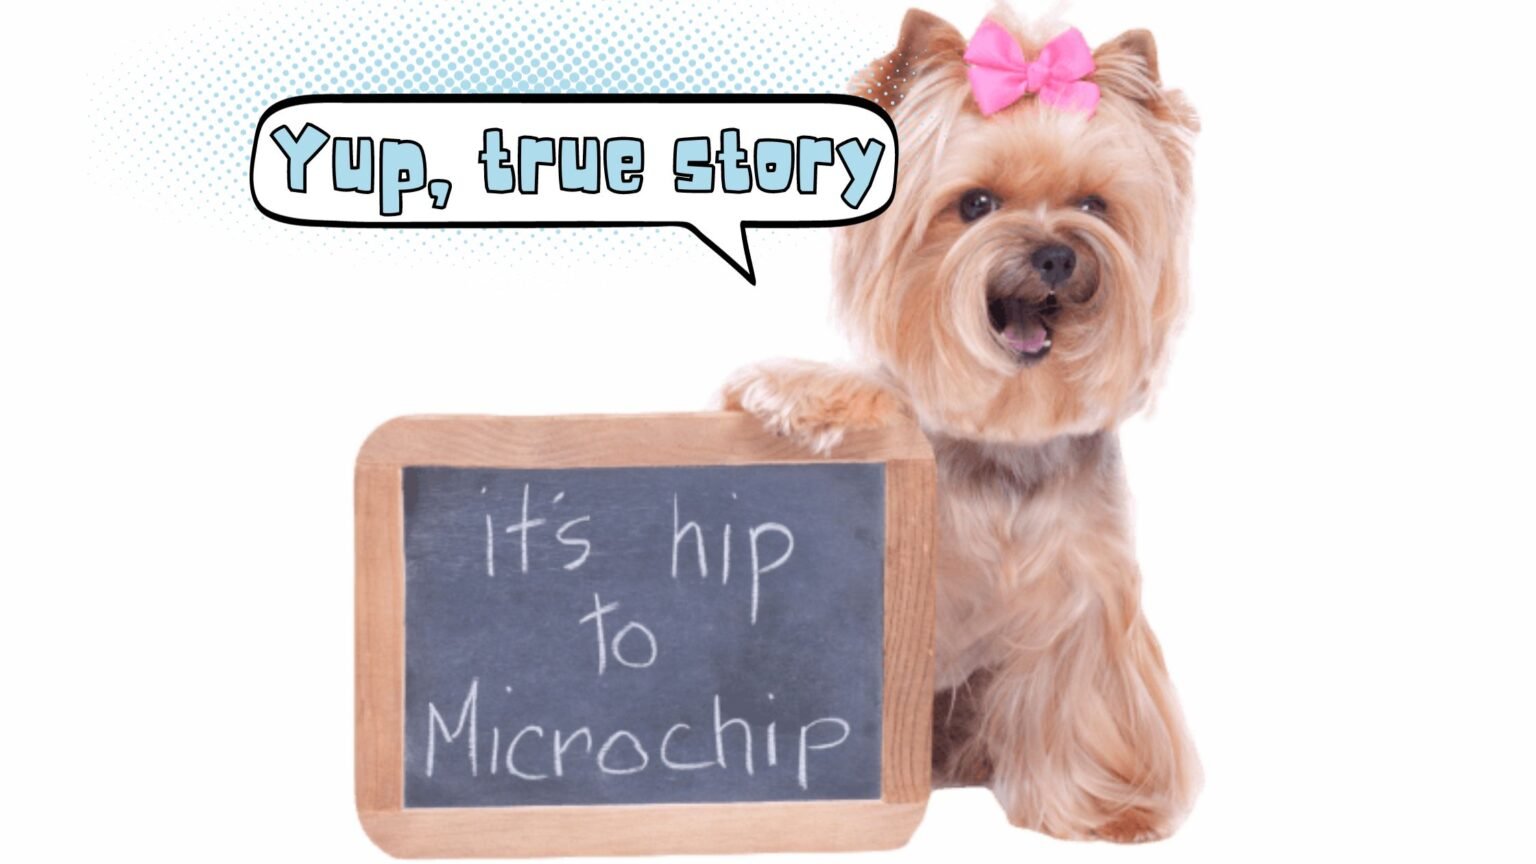 it's hip to microchip